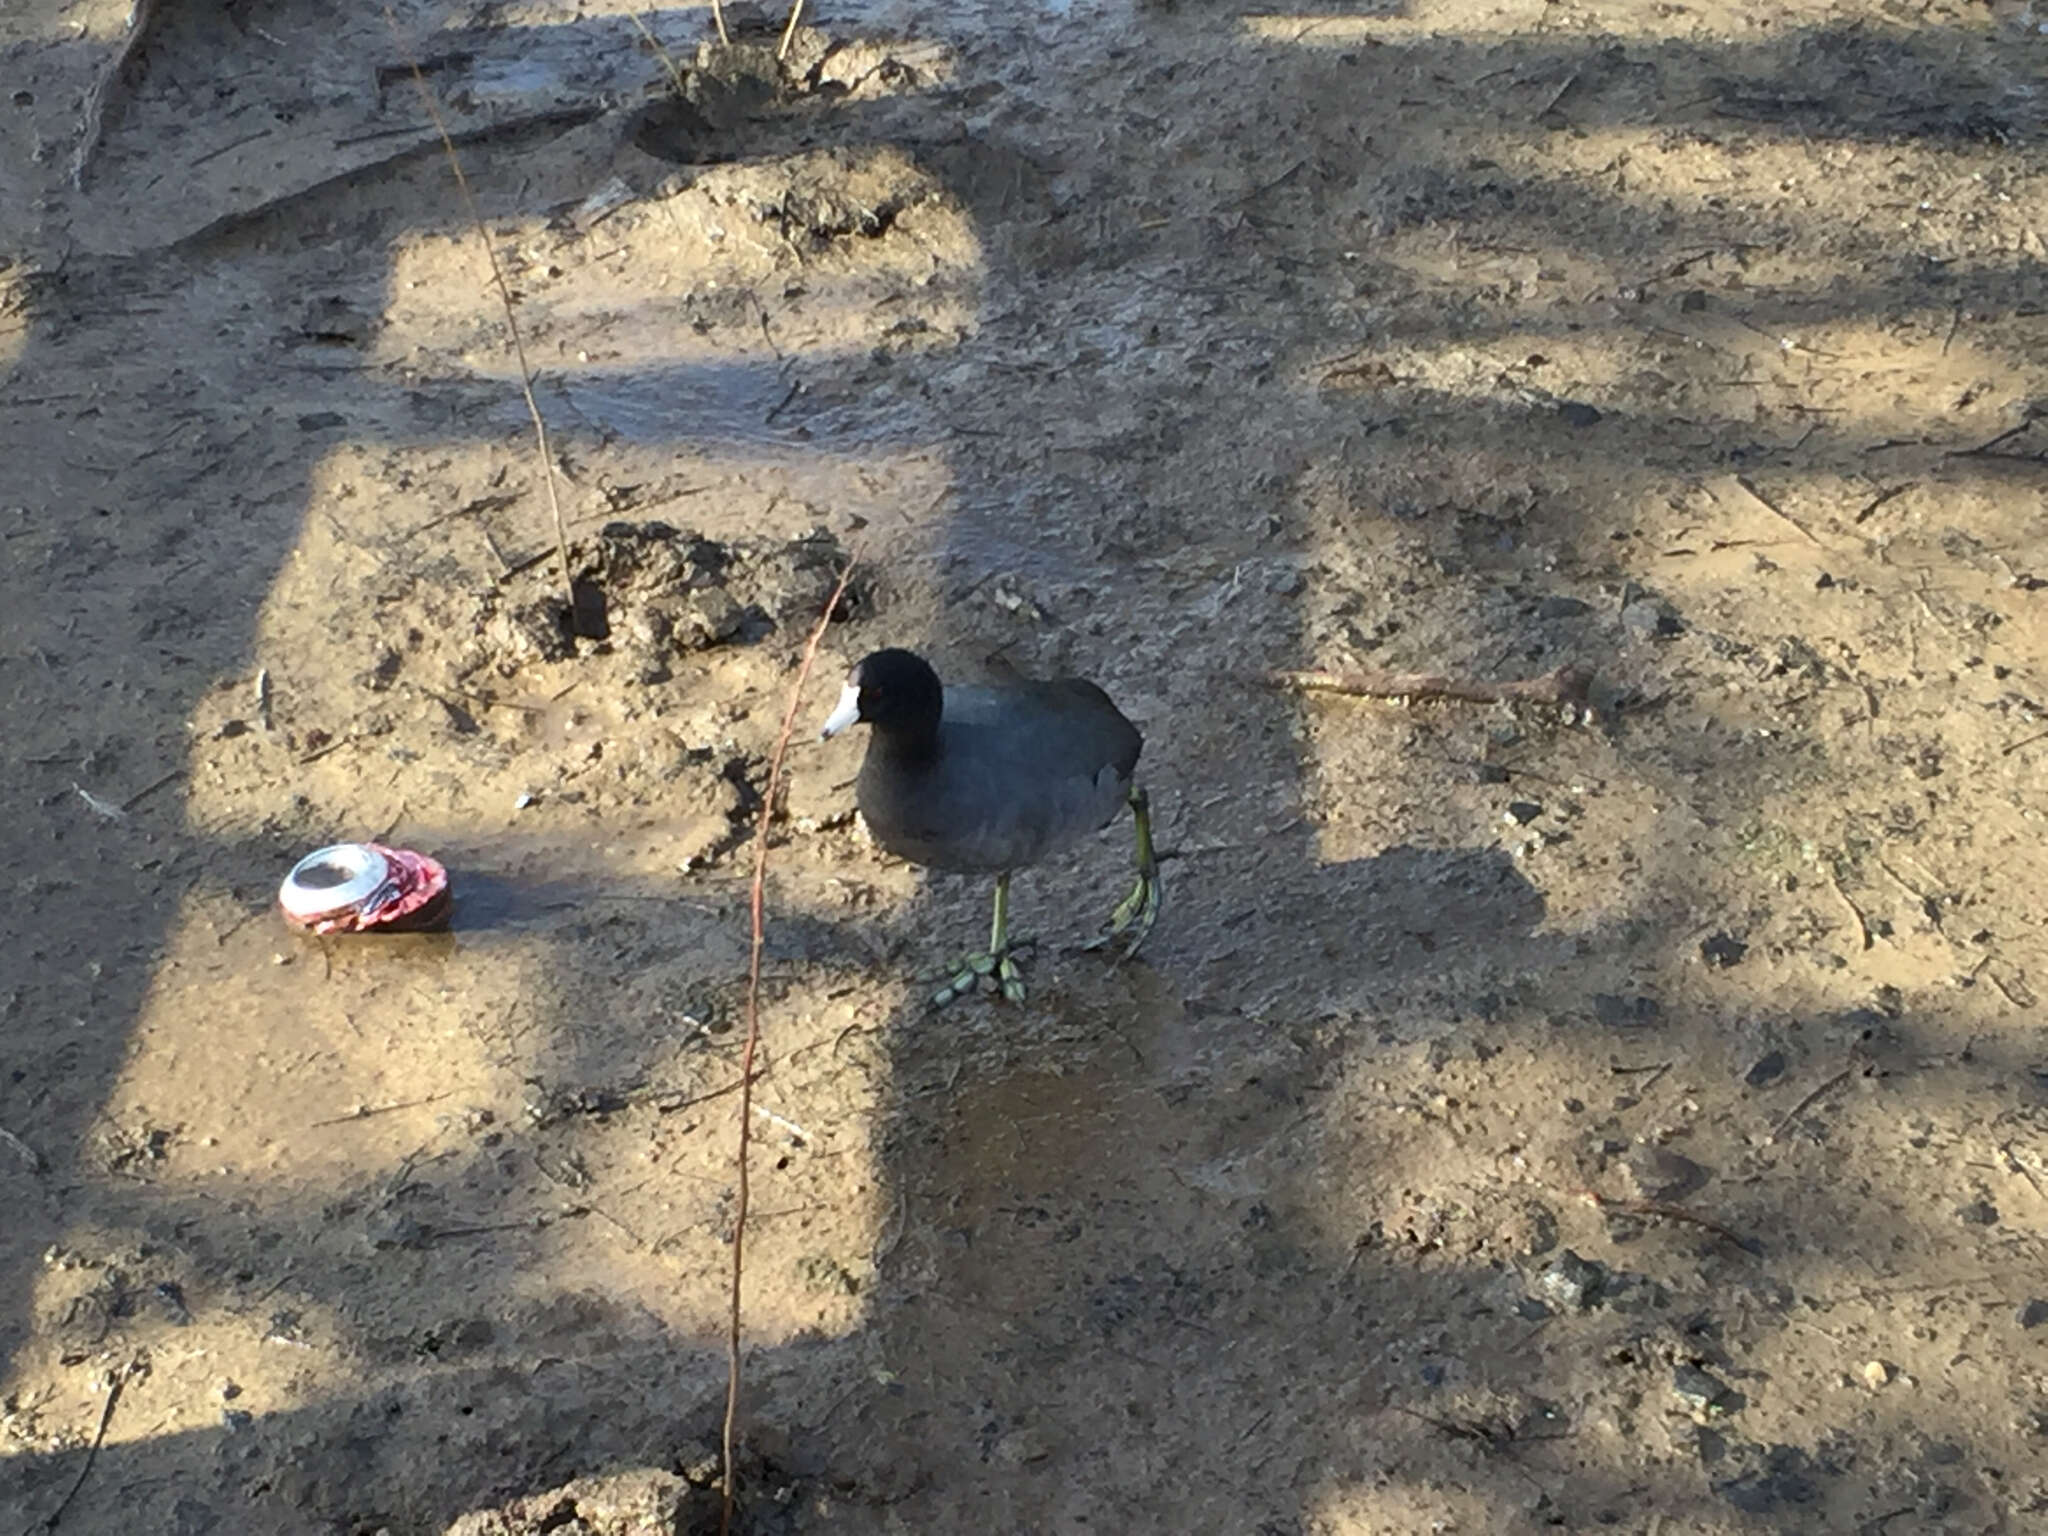 Image of North American Coot